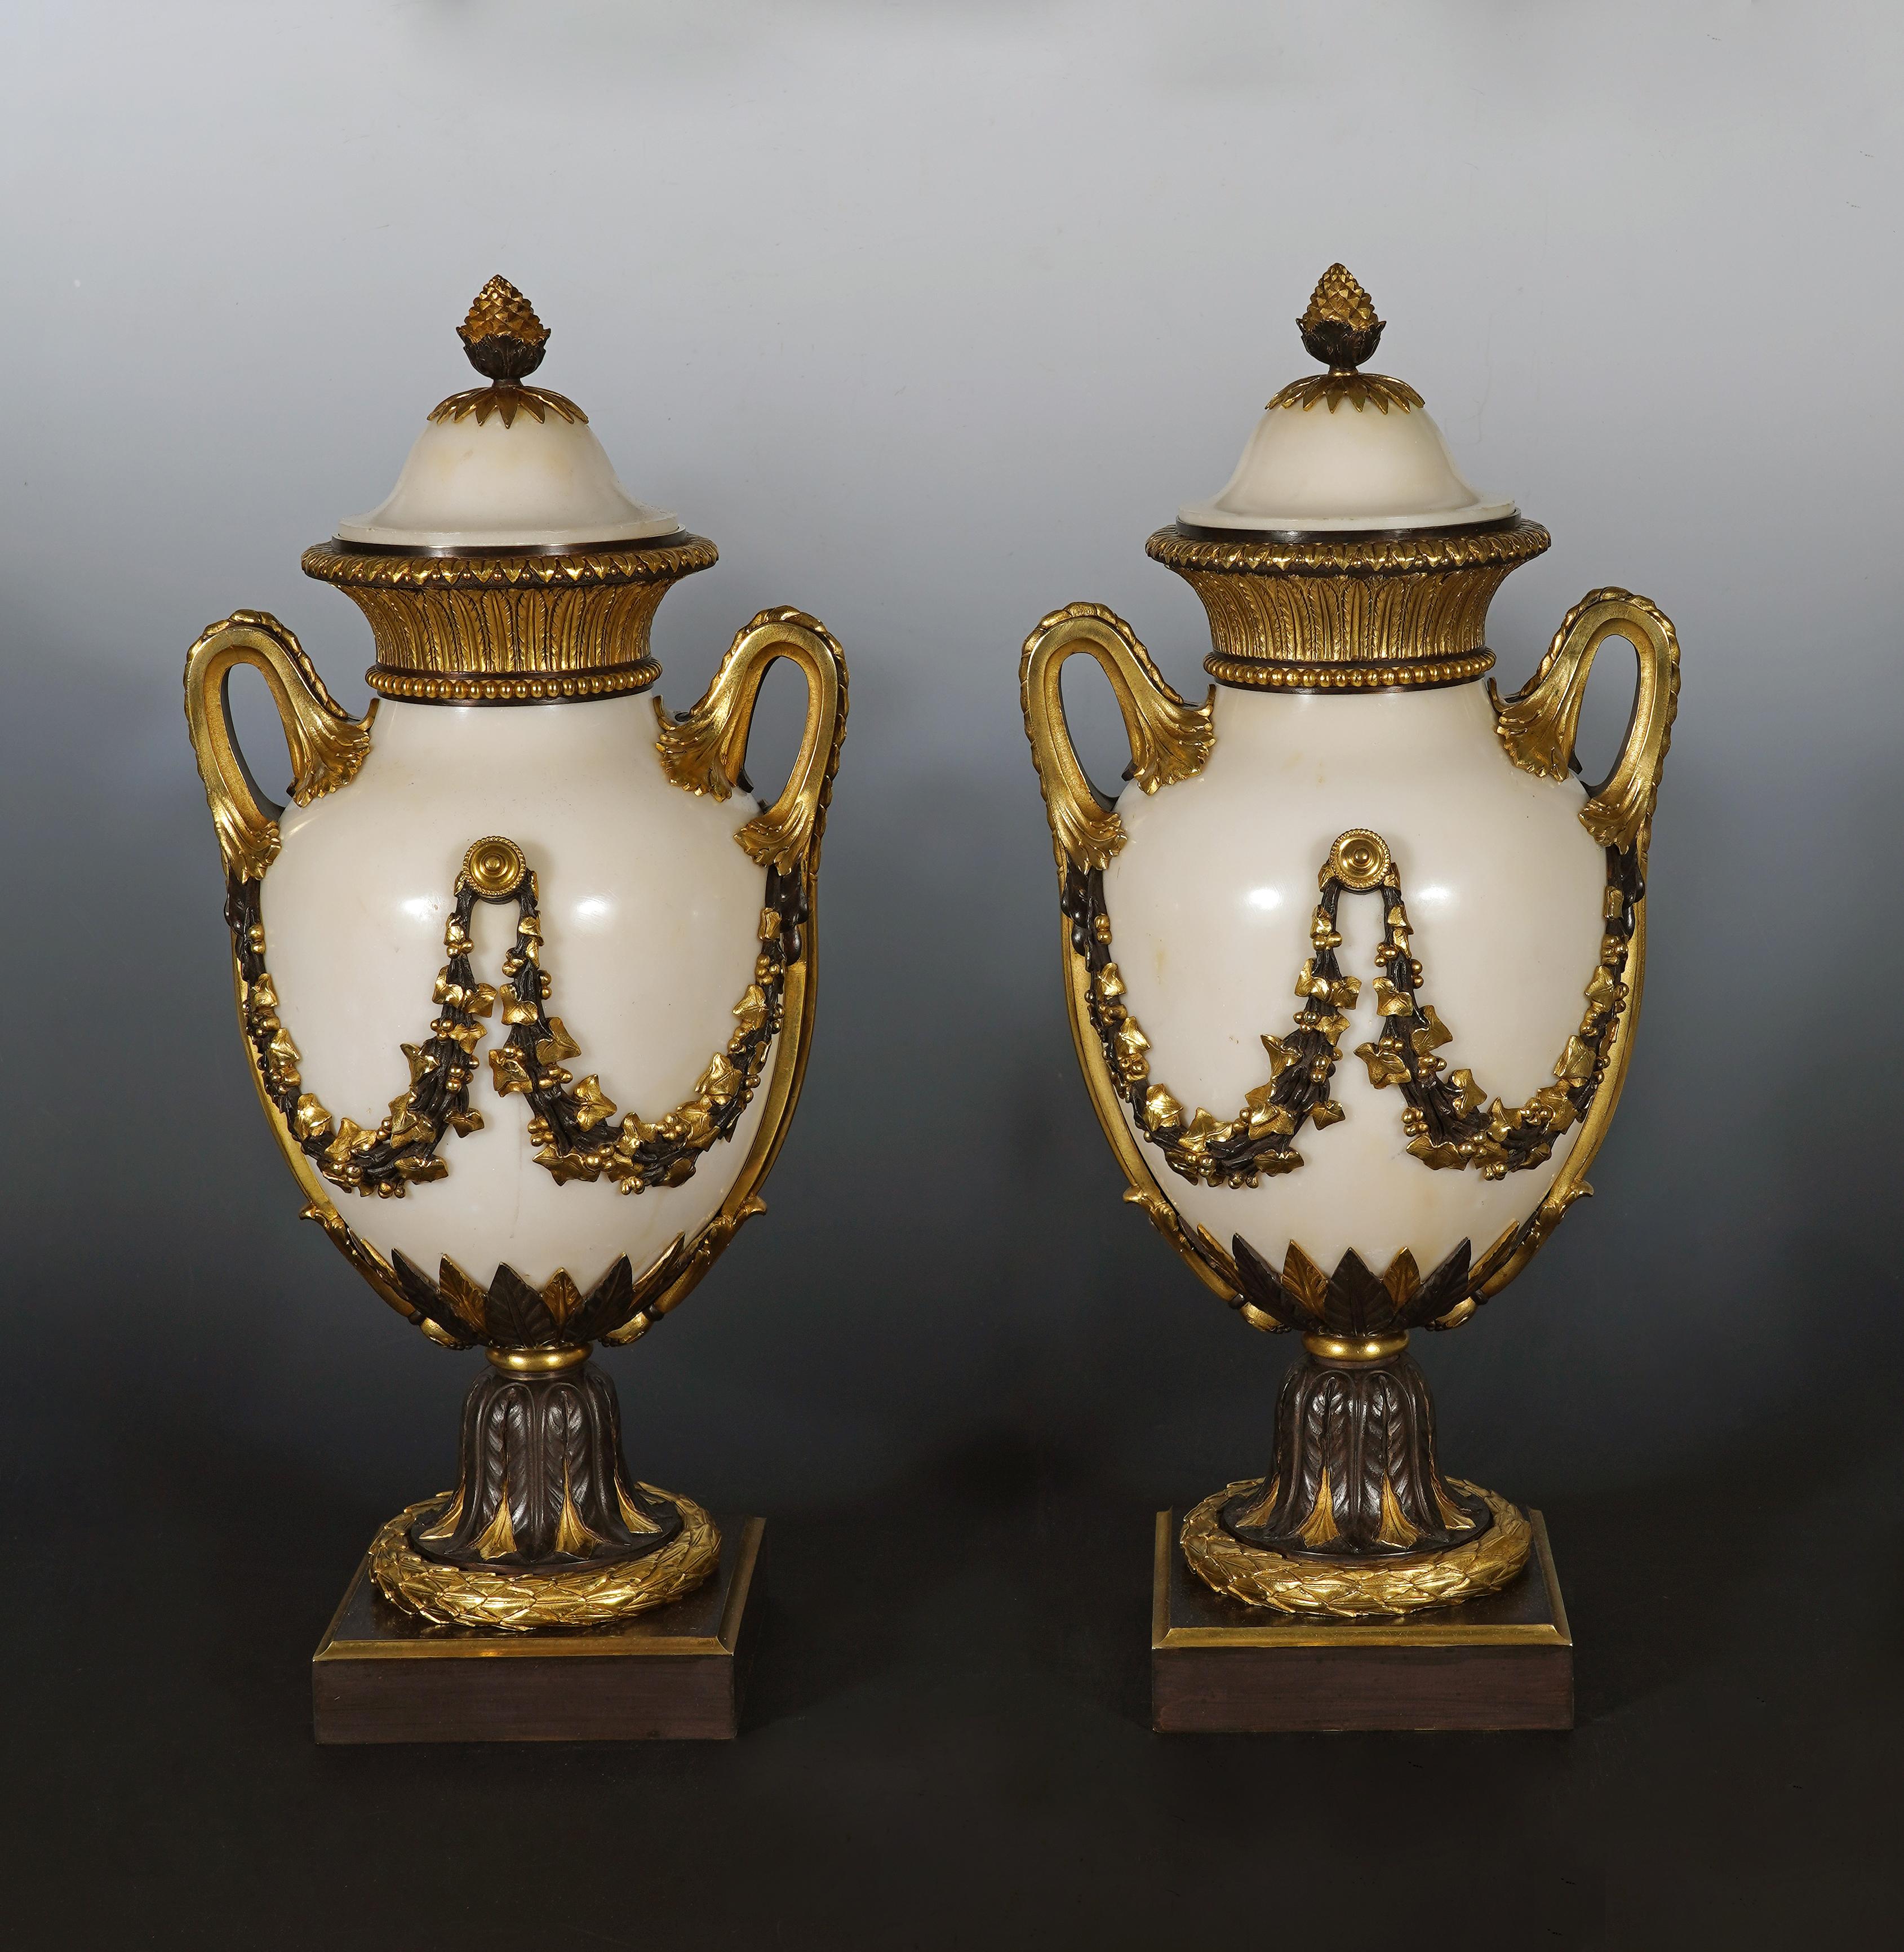 Beautiful pair of Louis XVI-inspired baluster-shaped cassolettes in white marble, enriched with an elegant bronze mount with a double patina. The lid is topped with a seed-shaped grip. 
The body is decorated with garlands of ivy attached to a